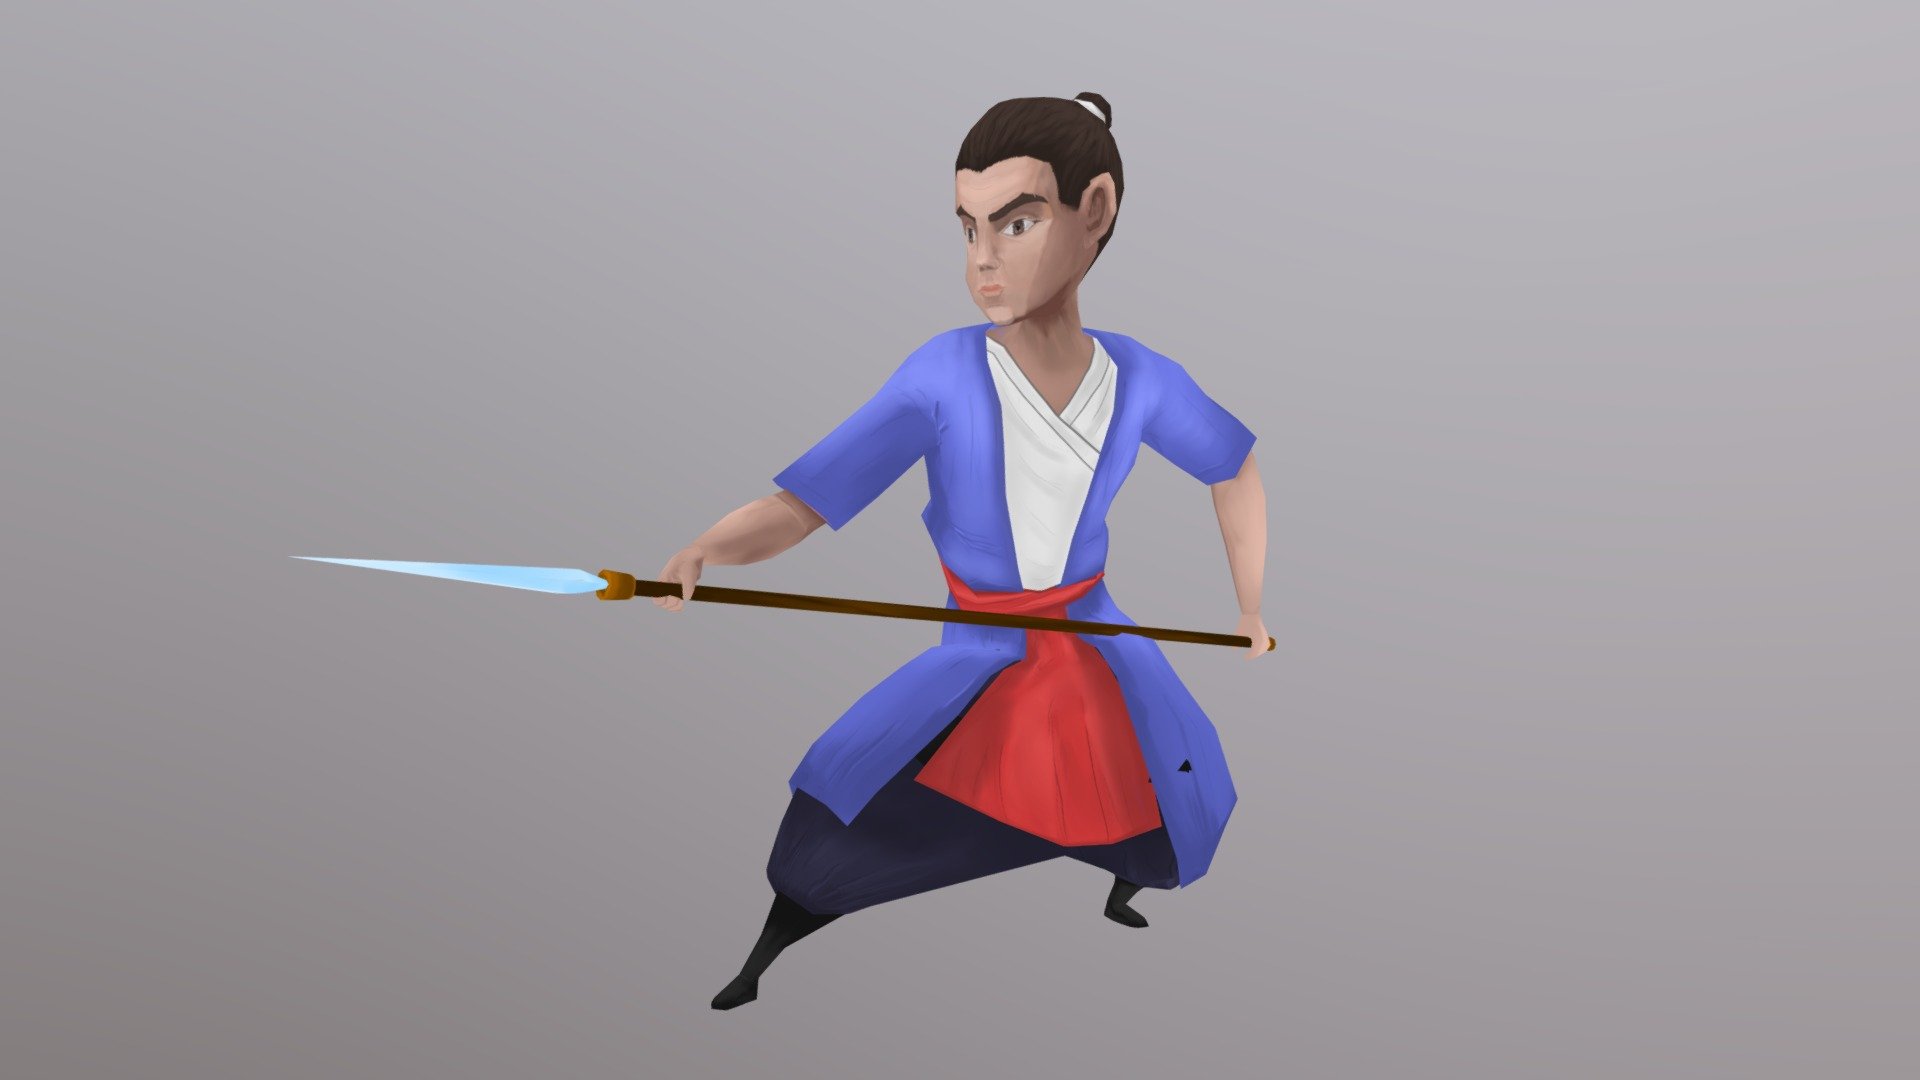 Ancient japan or china sperman.
Low poly model with hand painted textures in cartoon anime style 3d model